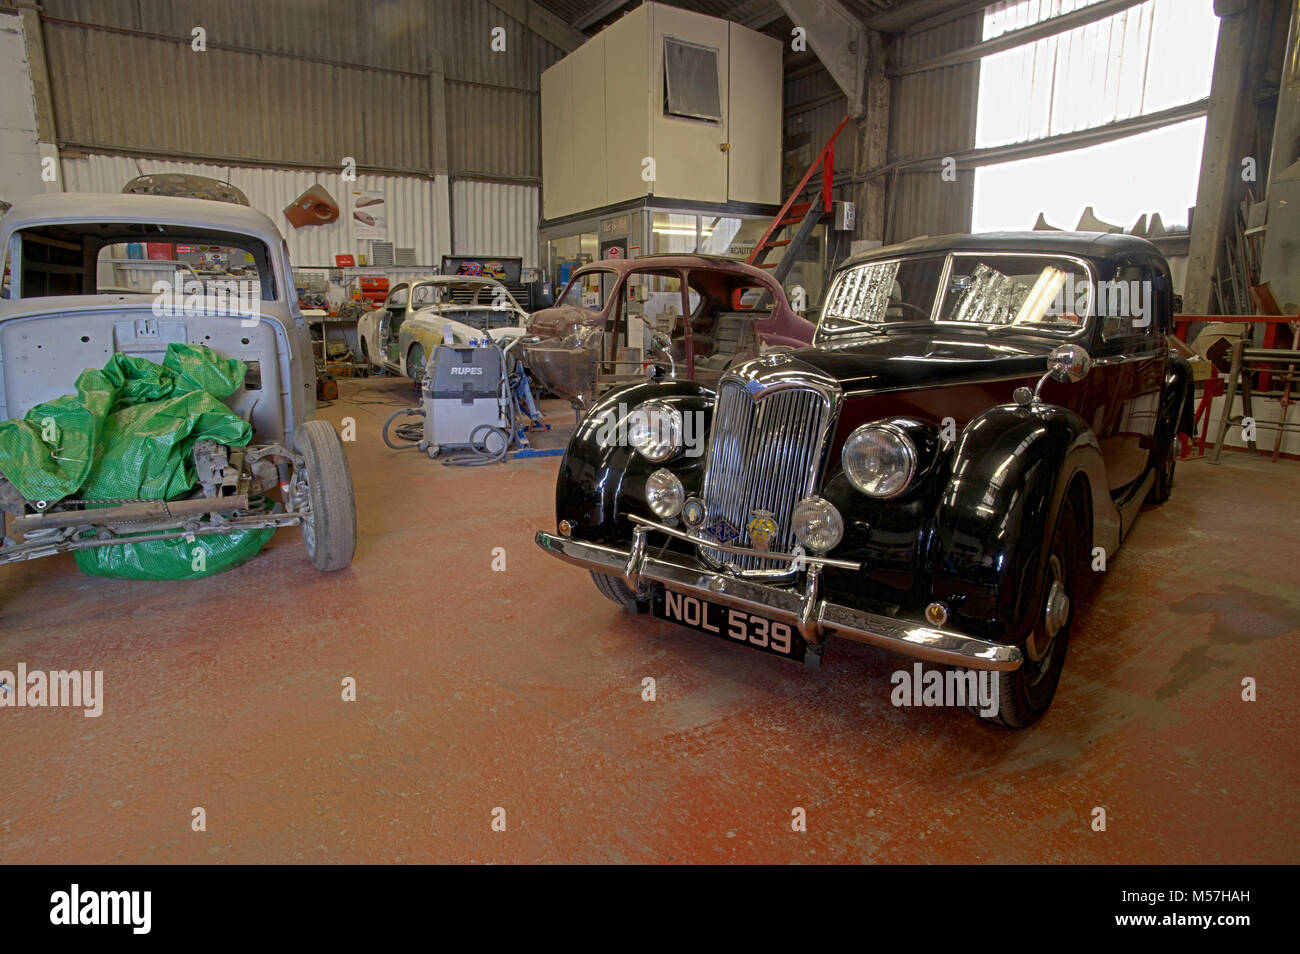 Classic car workshop filled with projects Stock Photo Alamy